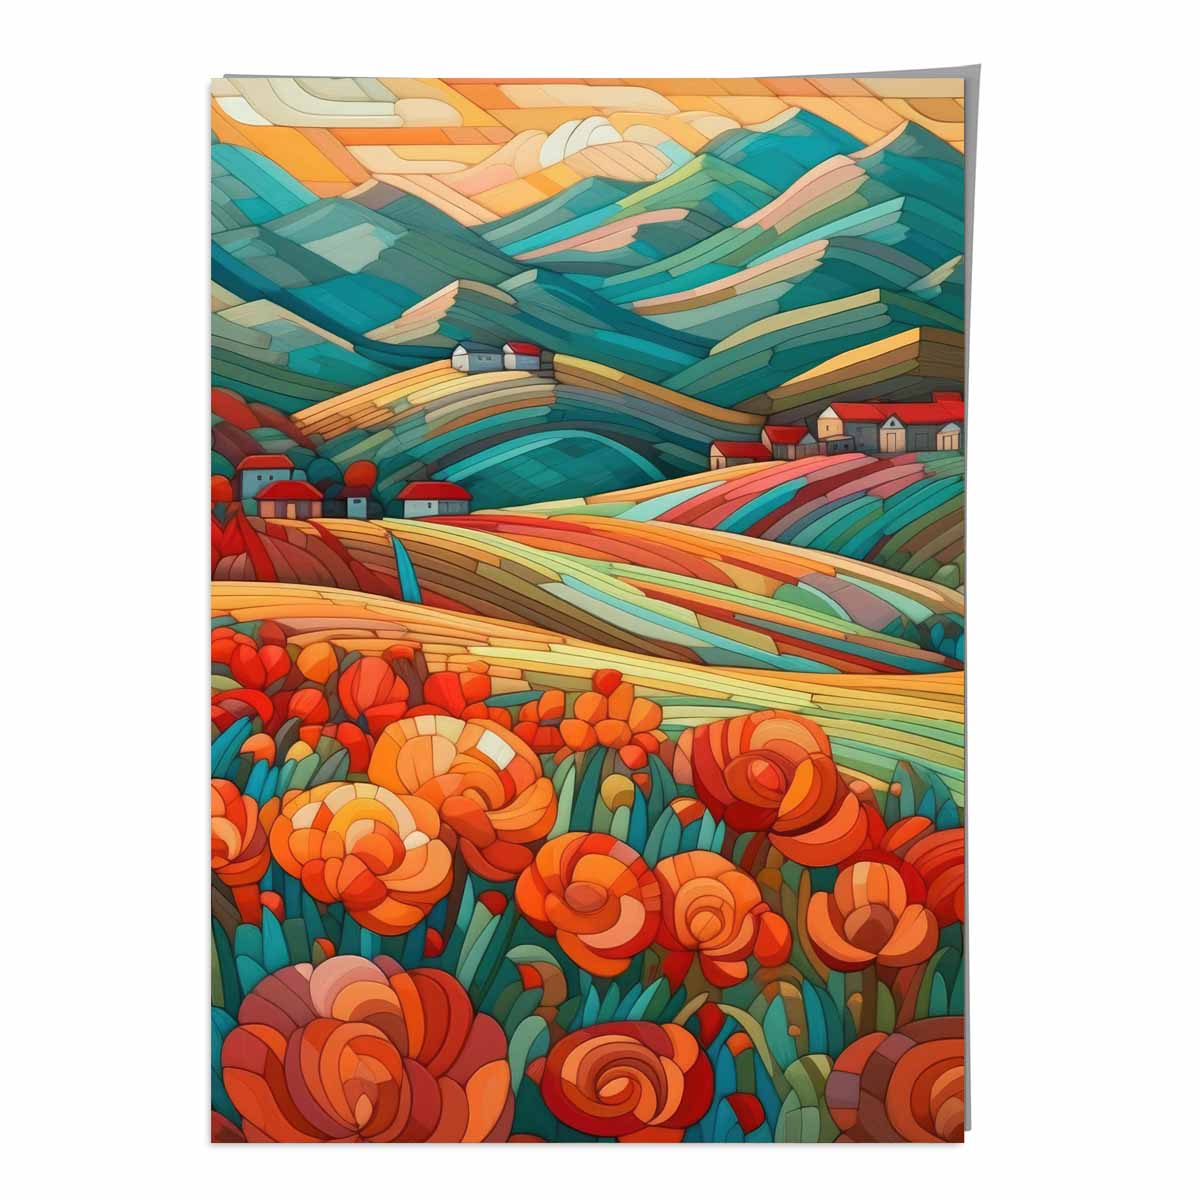 Colourful Landscape with Red Flowers Abstract Painting Art Print